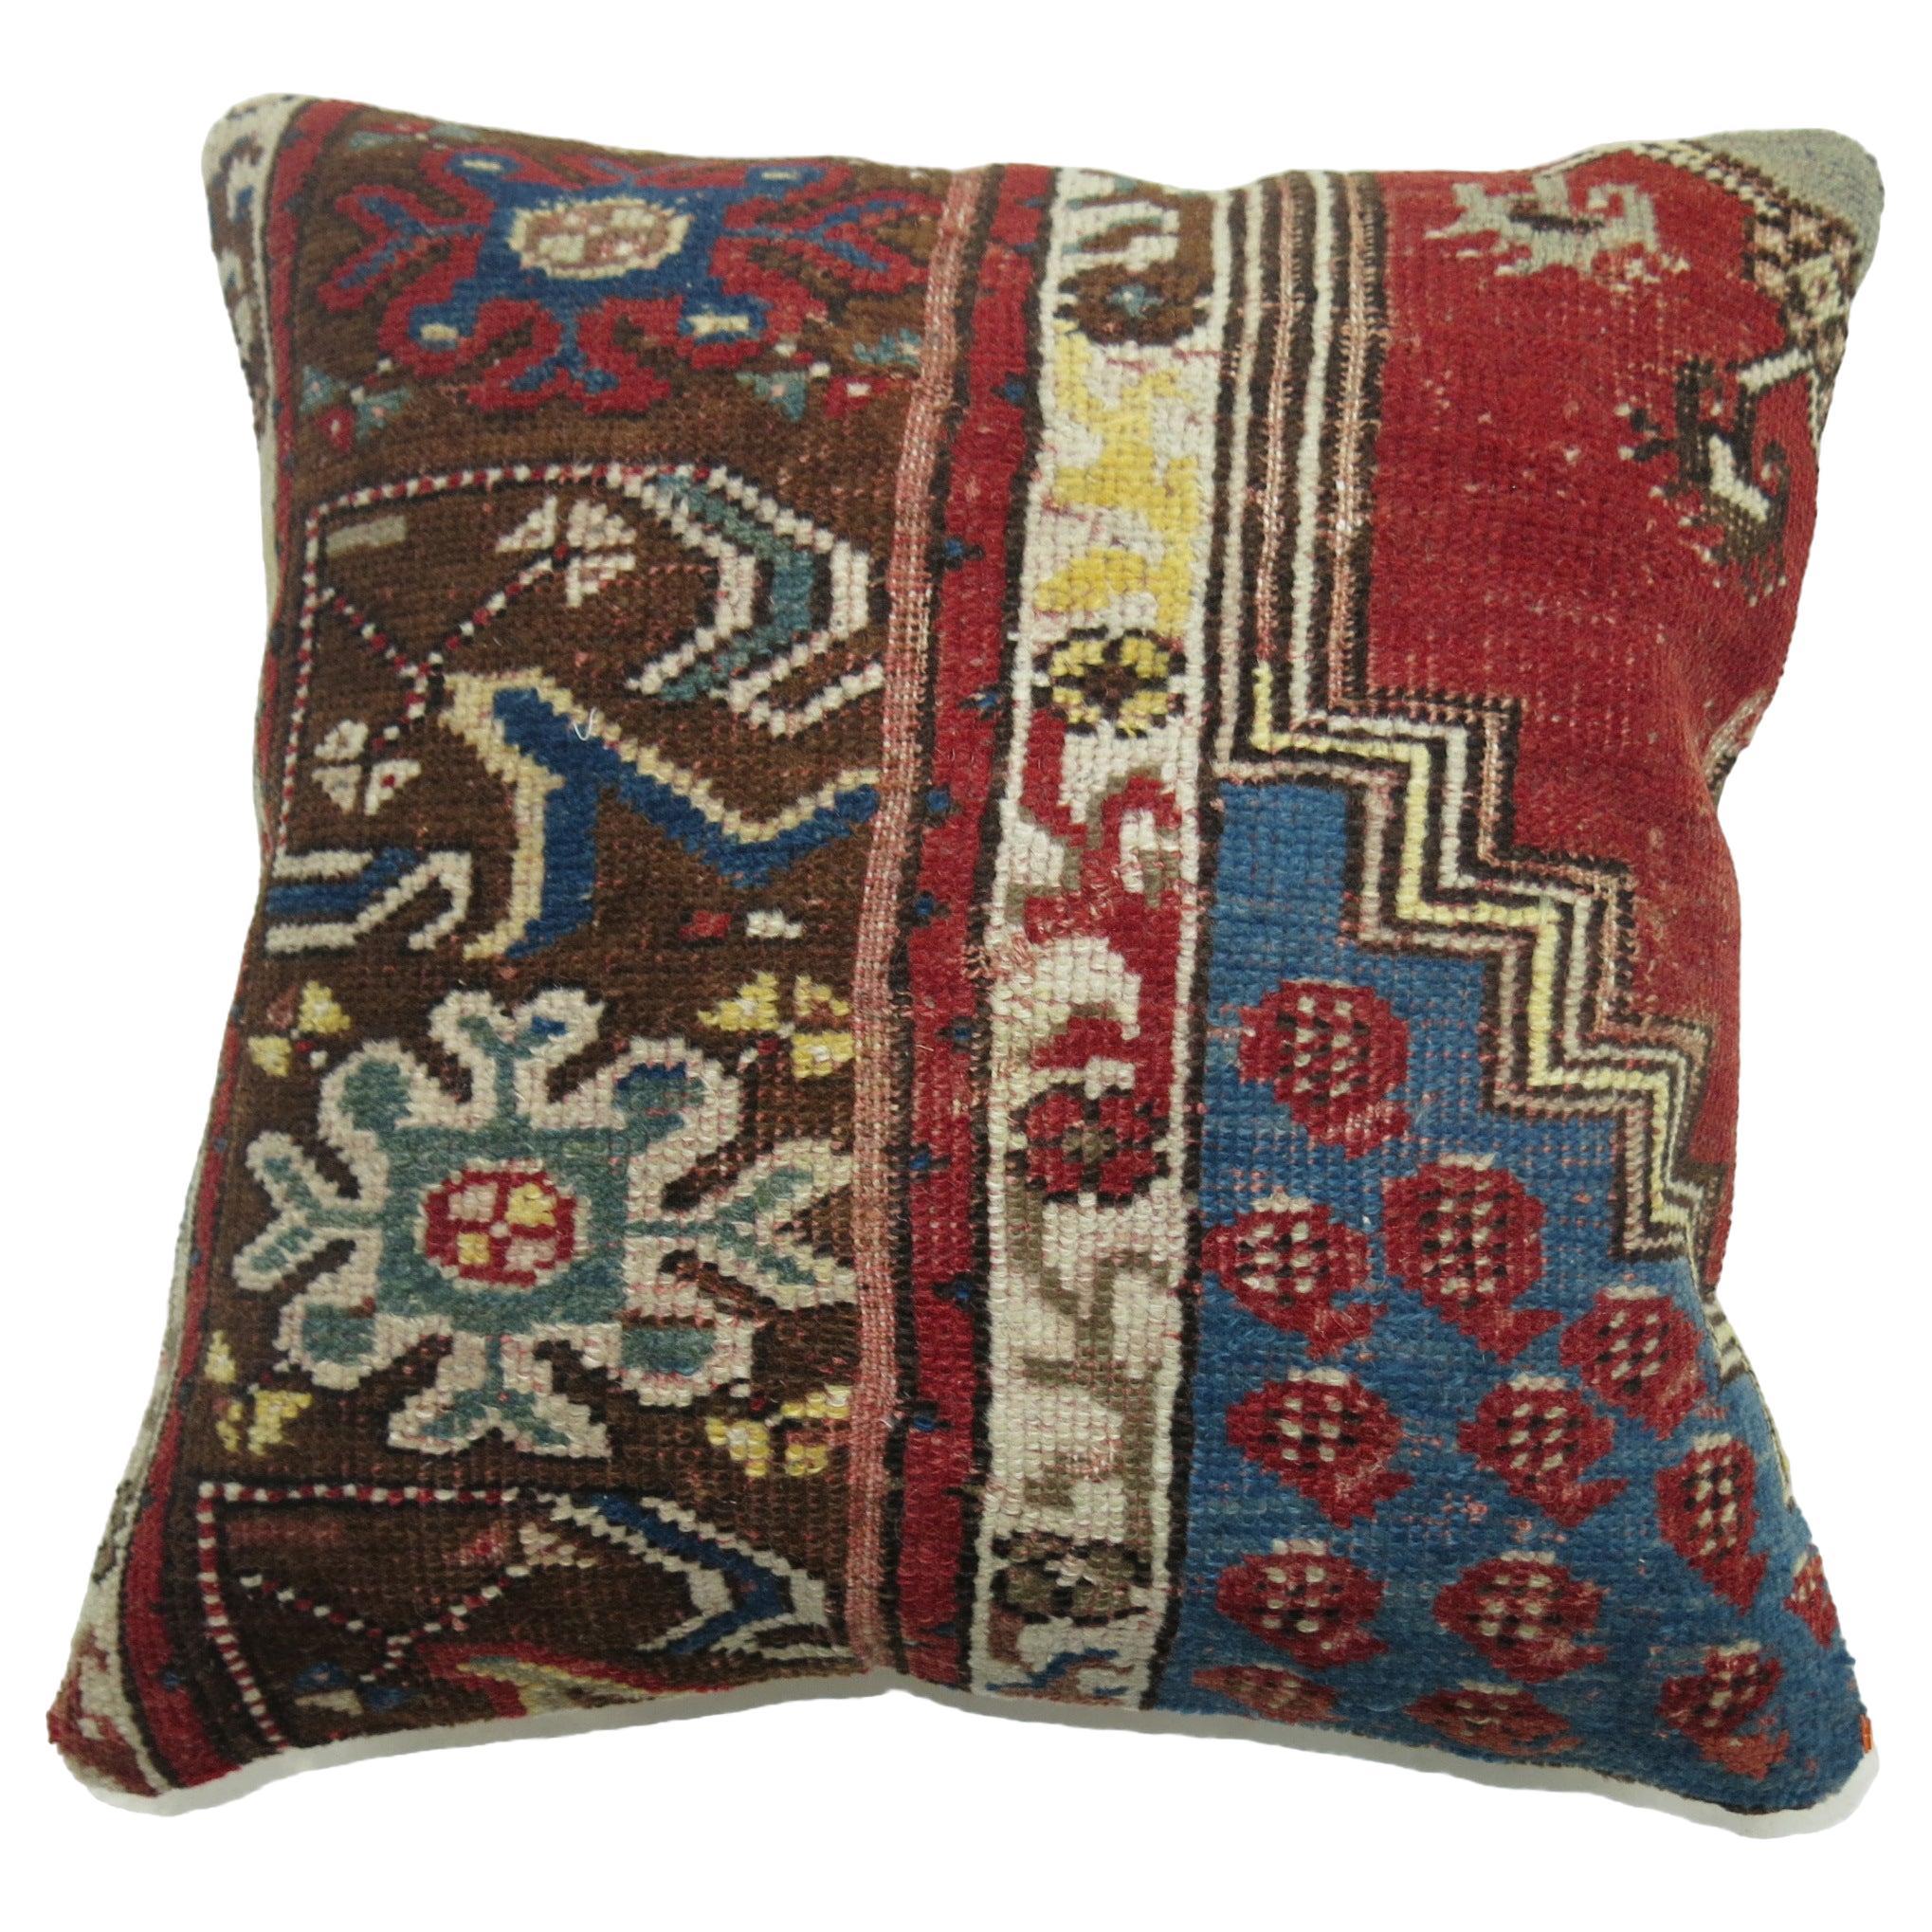 Pillow made from a vintage Turkish rug in reds and blues

17'' x 18''